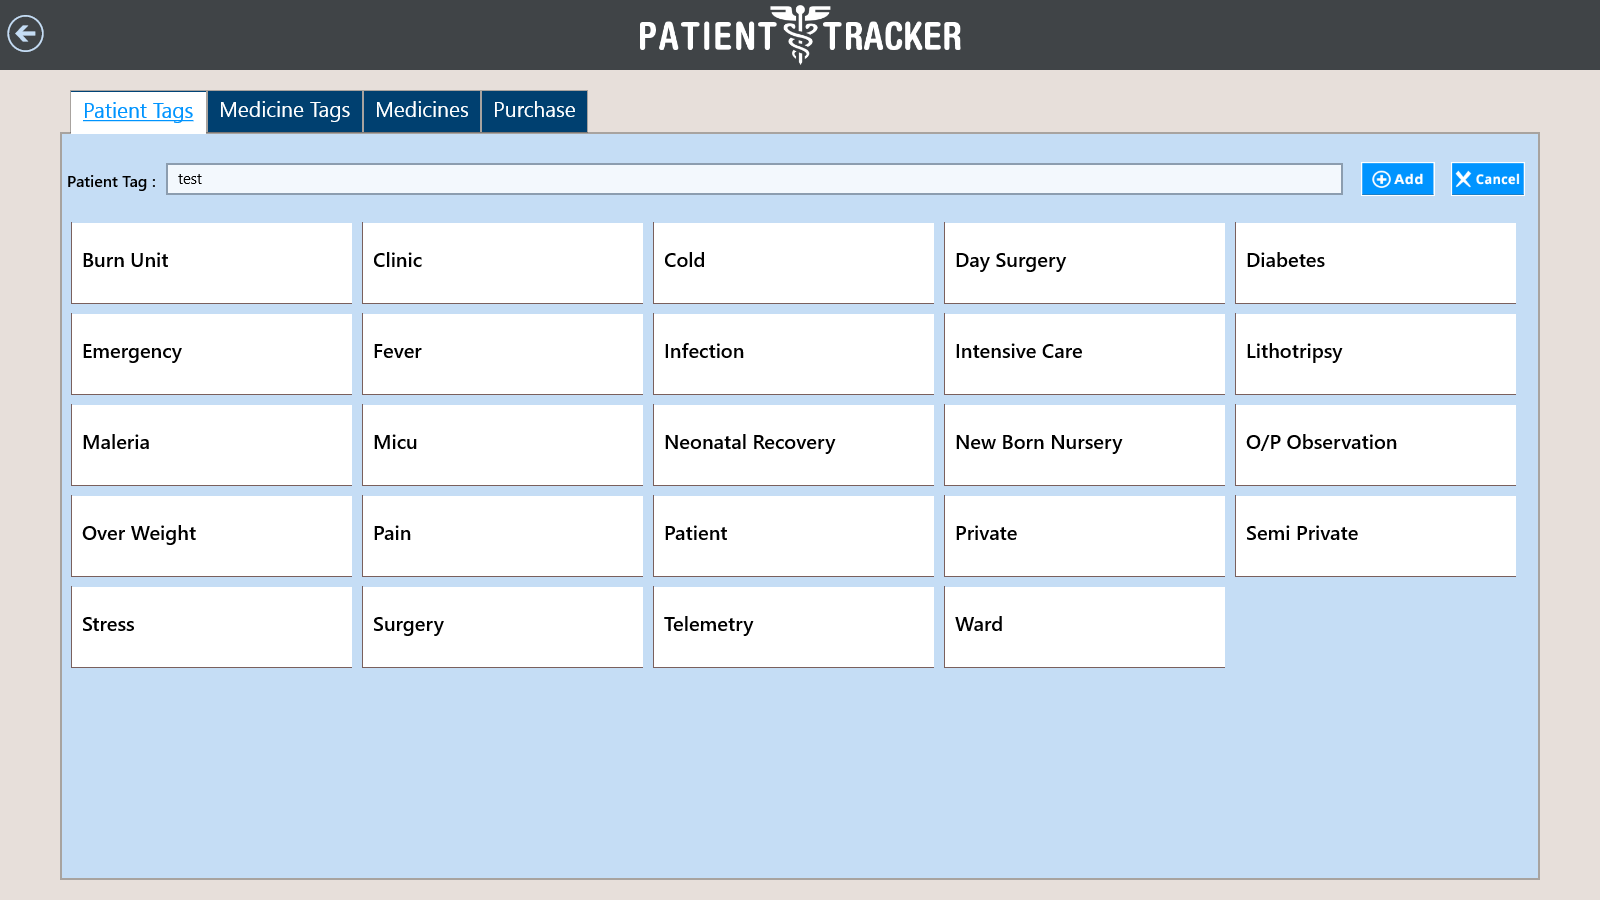 Setting page for managing Patient Tags, Medicine Tags, Medicine and Products.